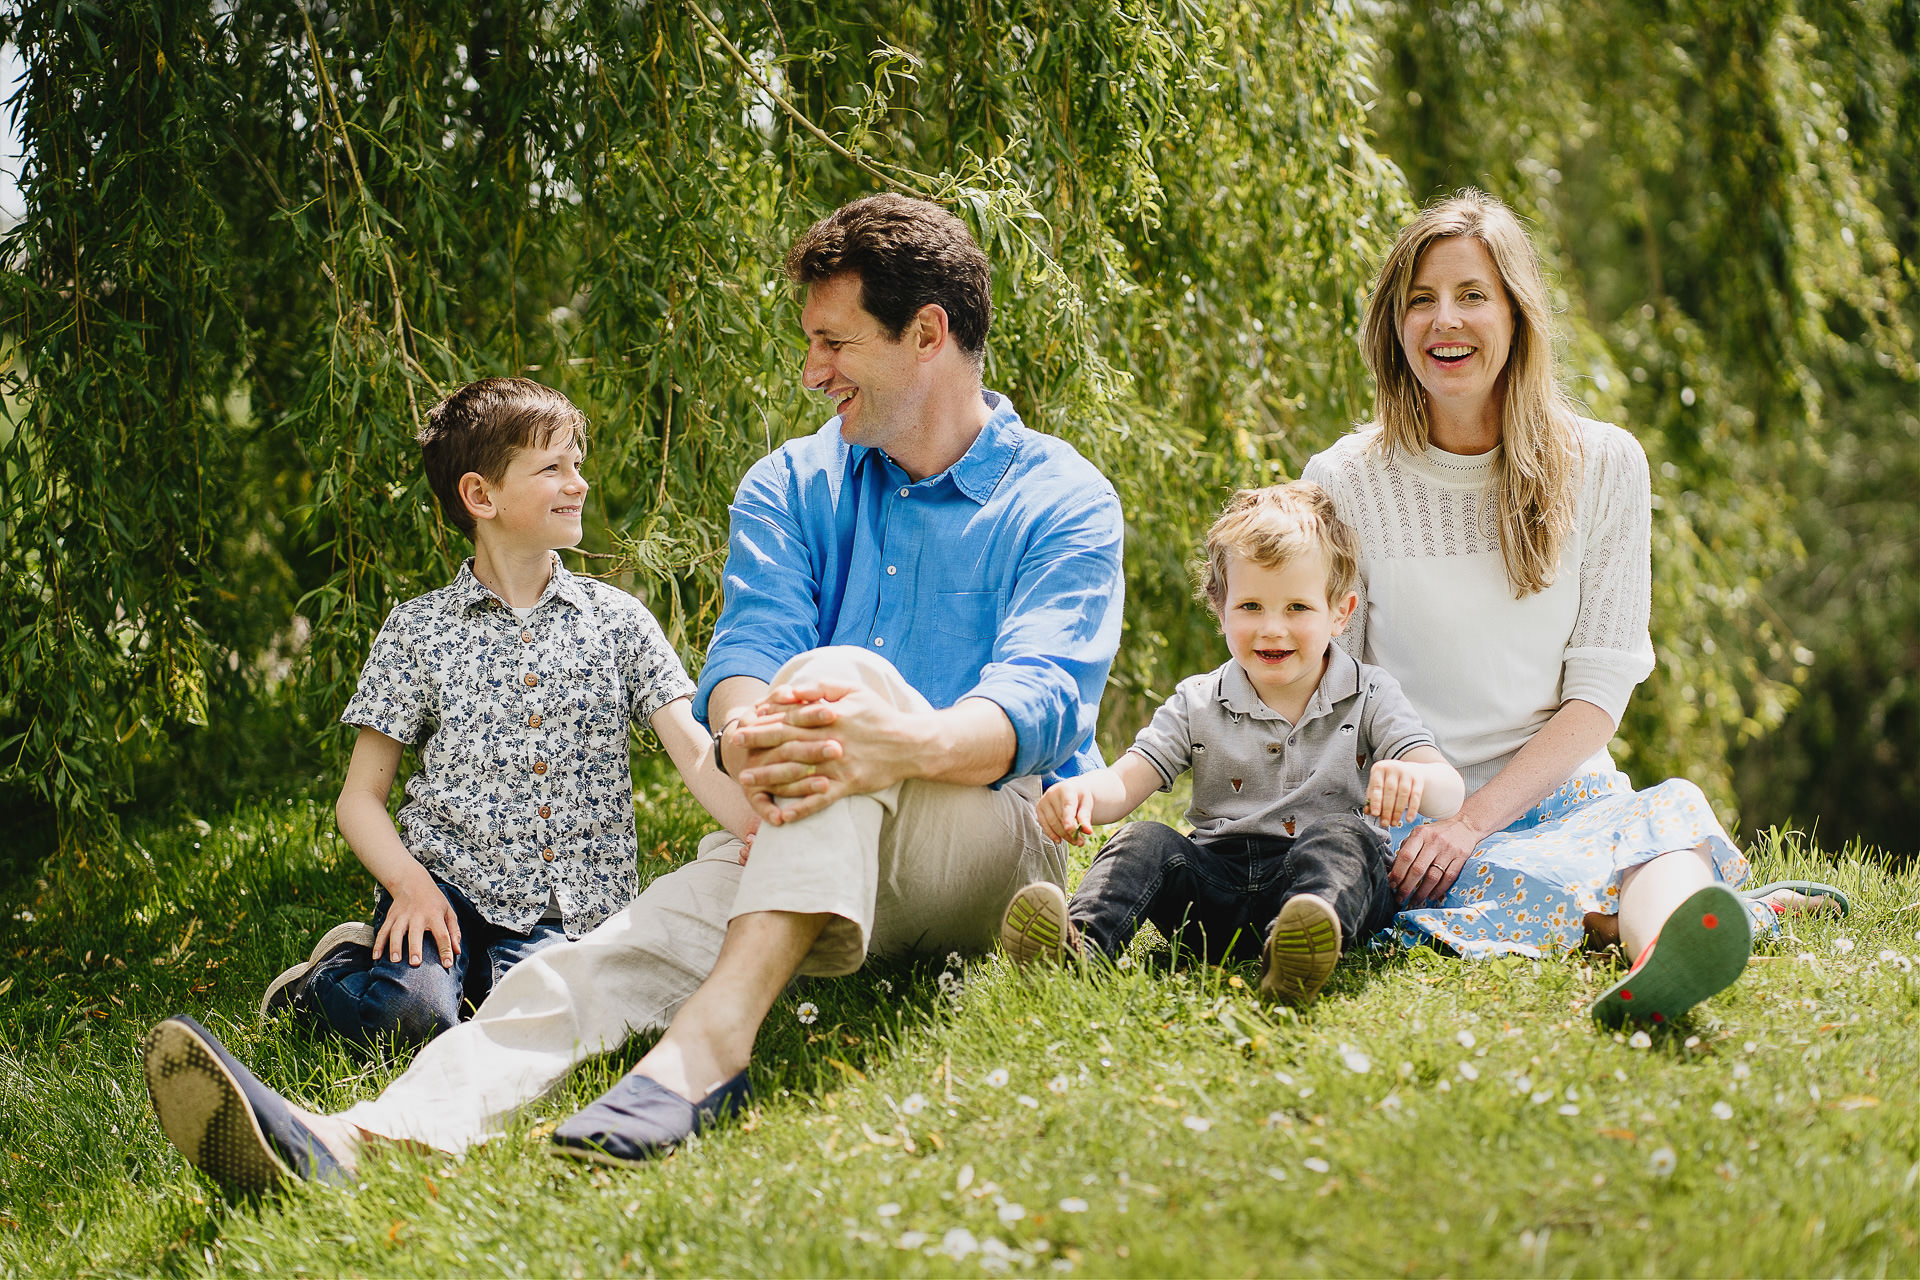 A relaxed family group photograph sitting on a grassy bank together